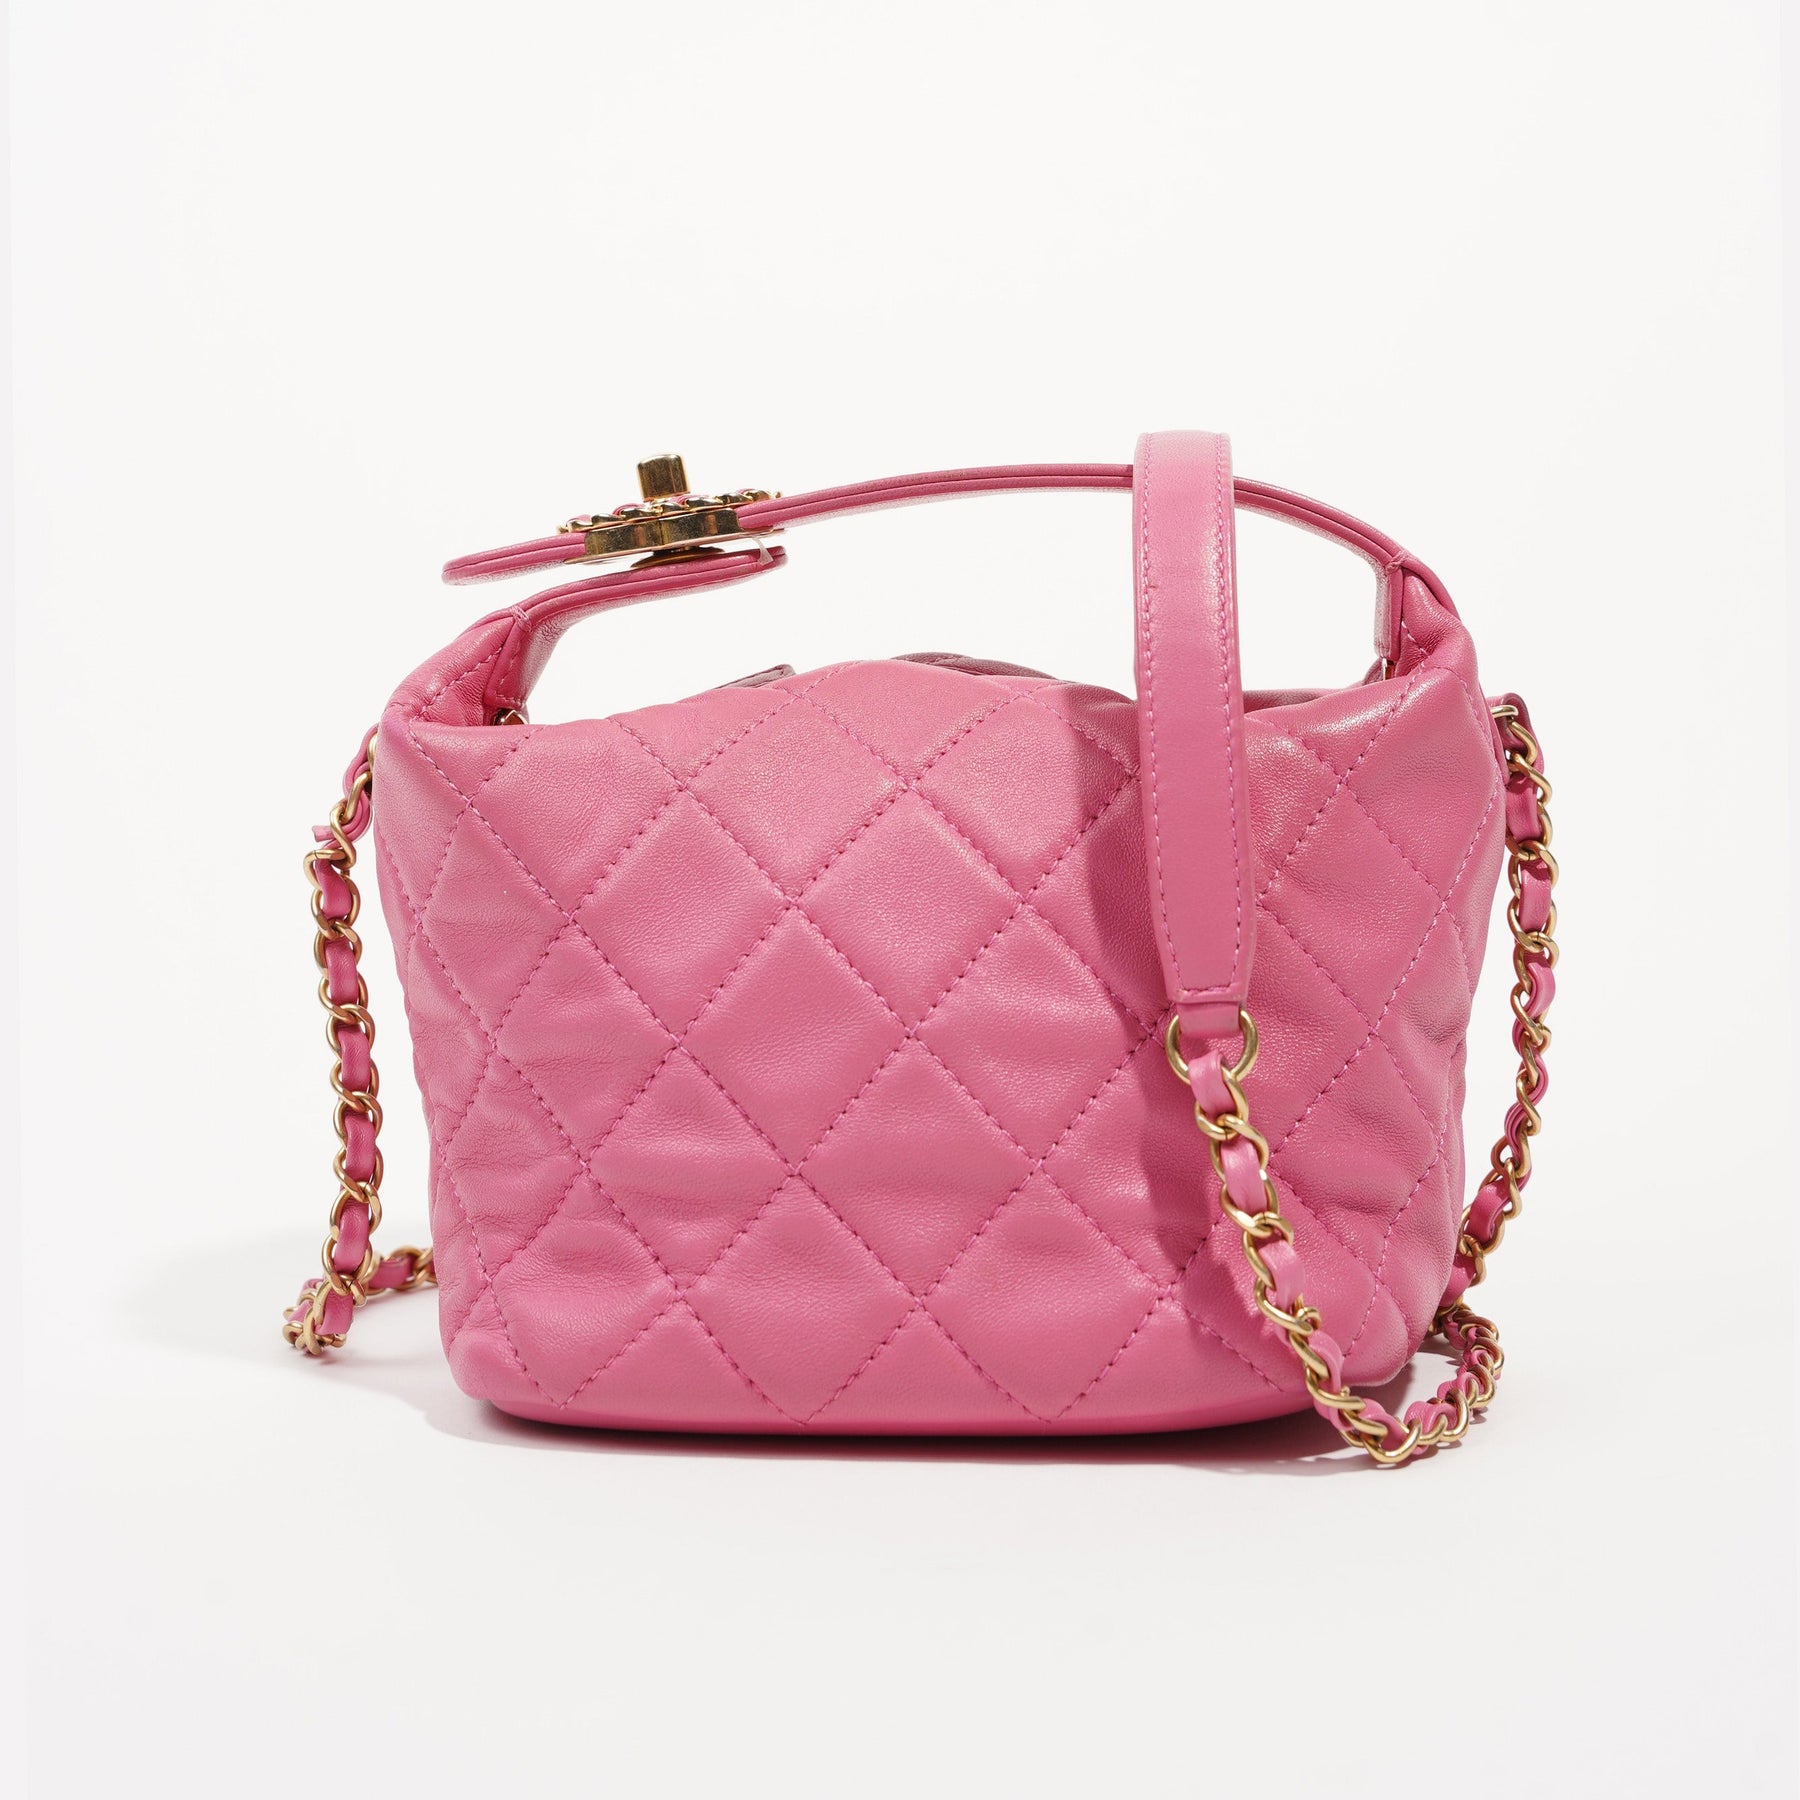 CHANEL CAMBON PINK CALF LEATHER SLING BAG (950xxxx